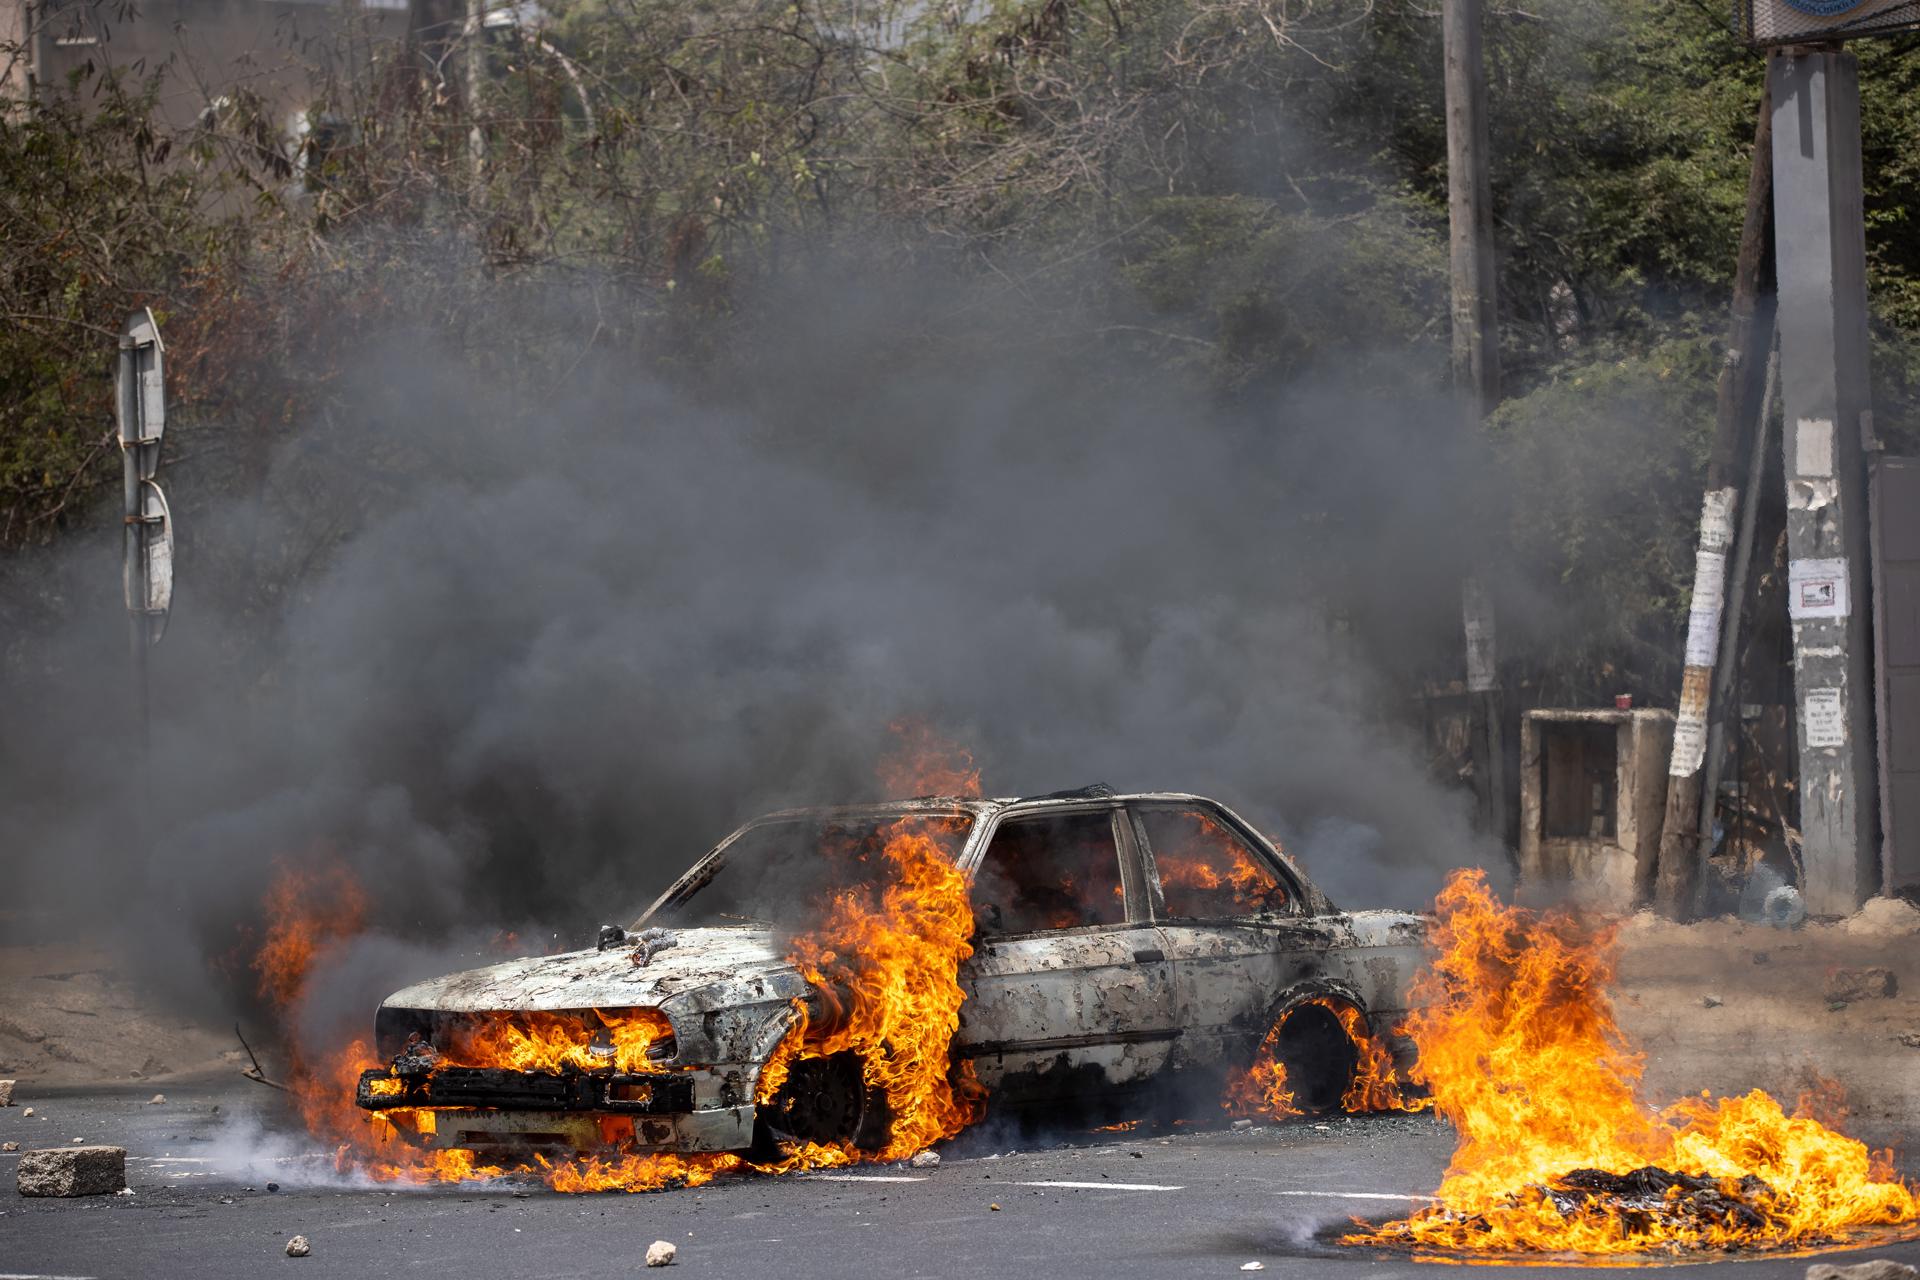 A car burns after being set on fire by protesters outside Cheikh Anta Diop University in Dakar, Senegal, 01 June 2023. EFE-EPA/JEROME FAVRE